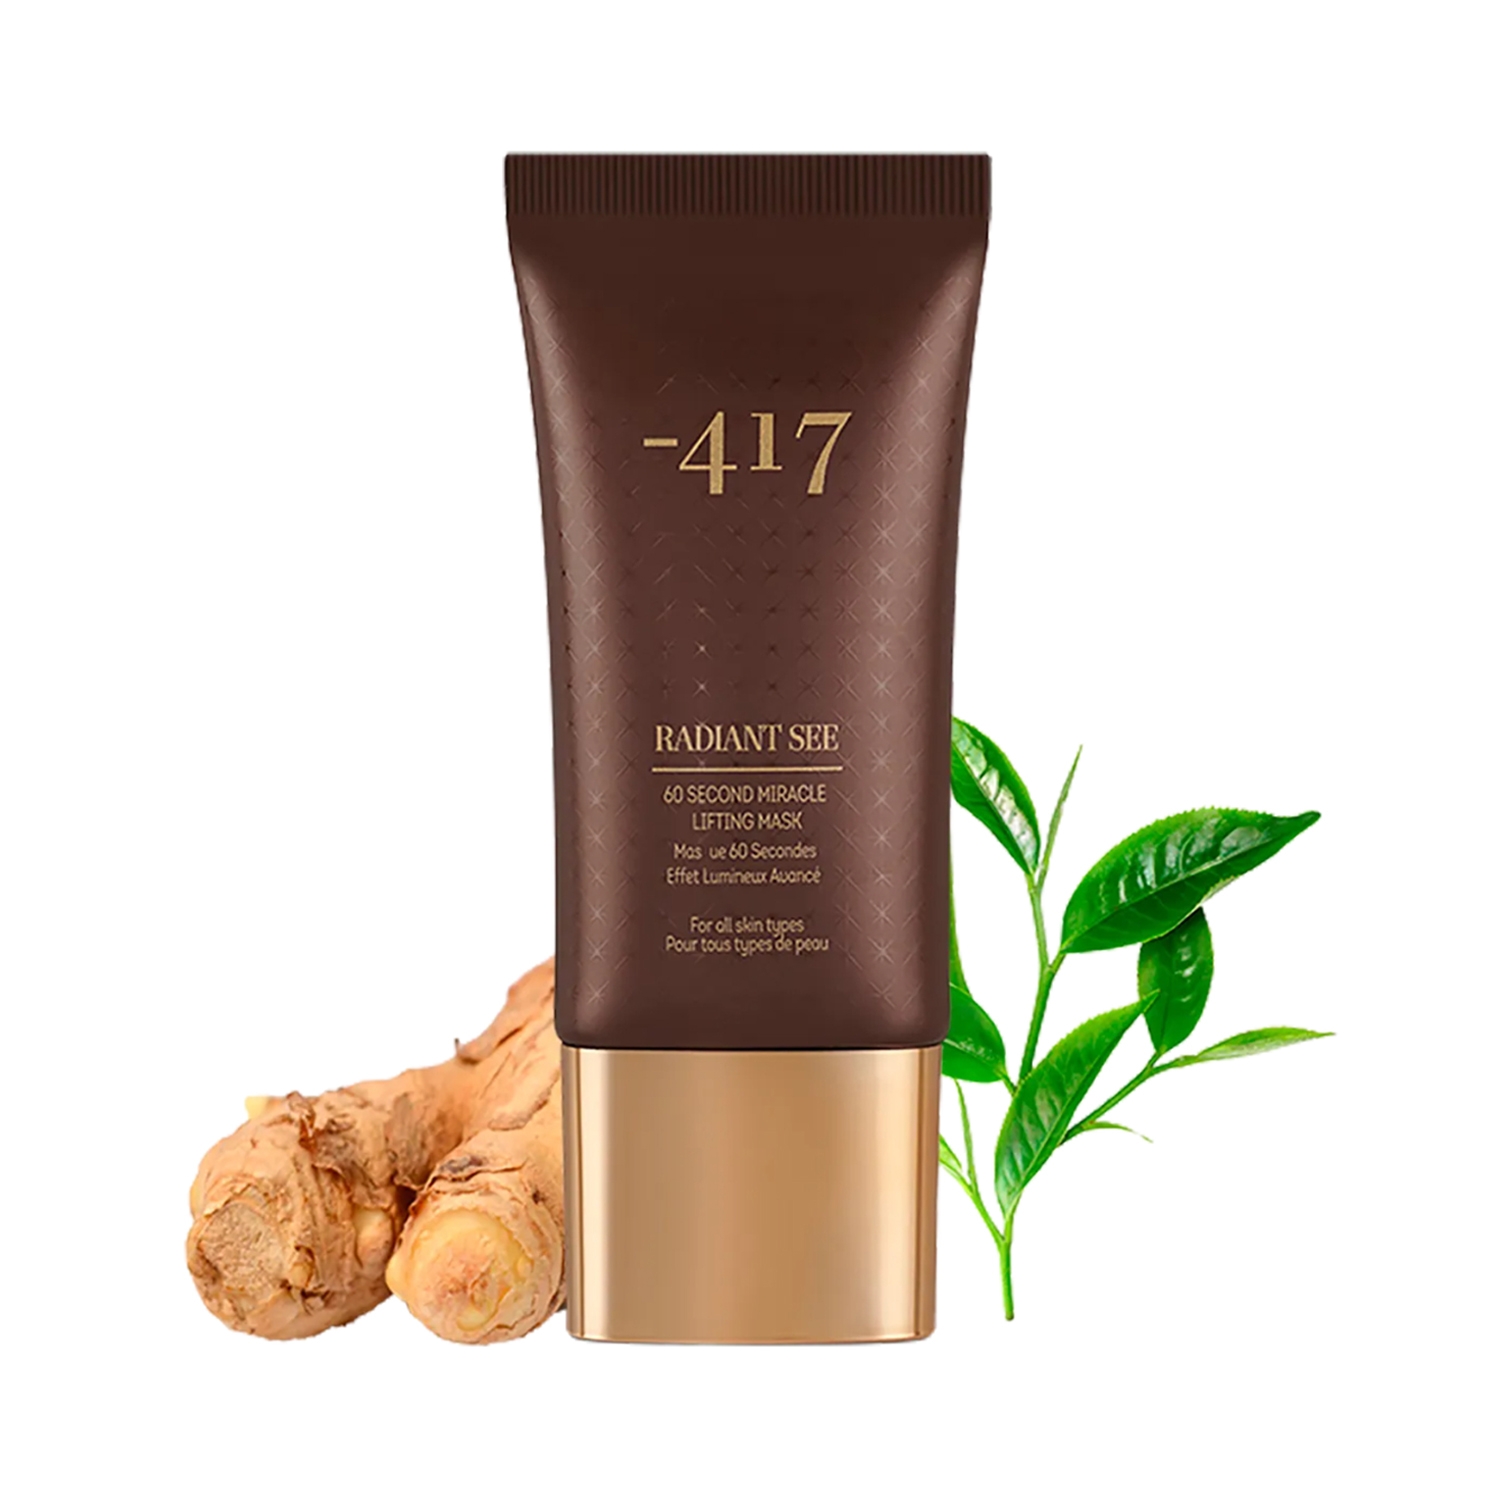 Minus 417 Radiant See 60 Second Miracle Lifting Mask (50ml)